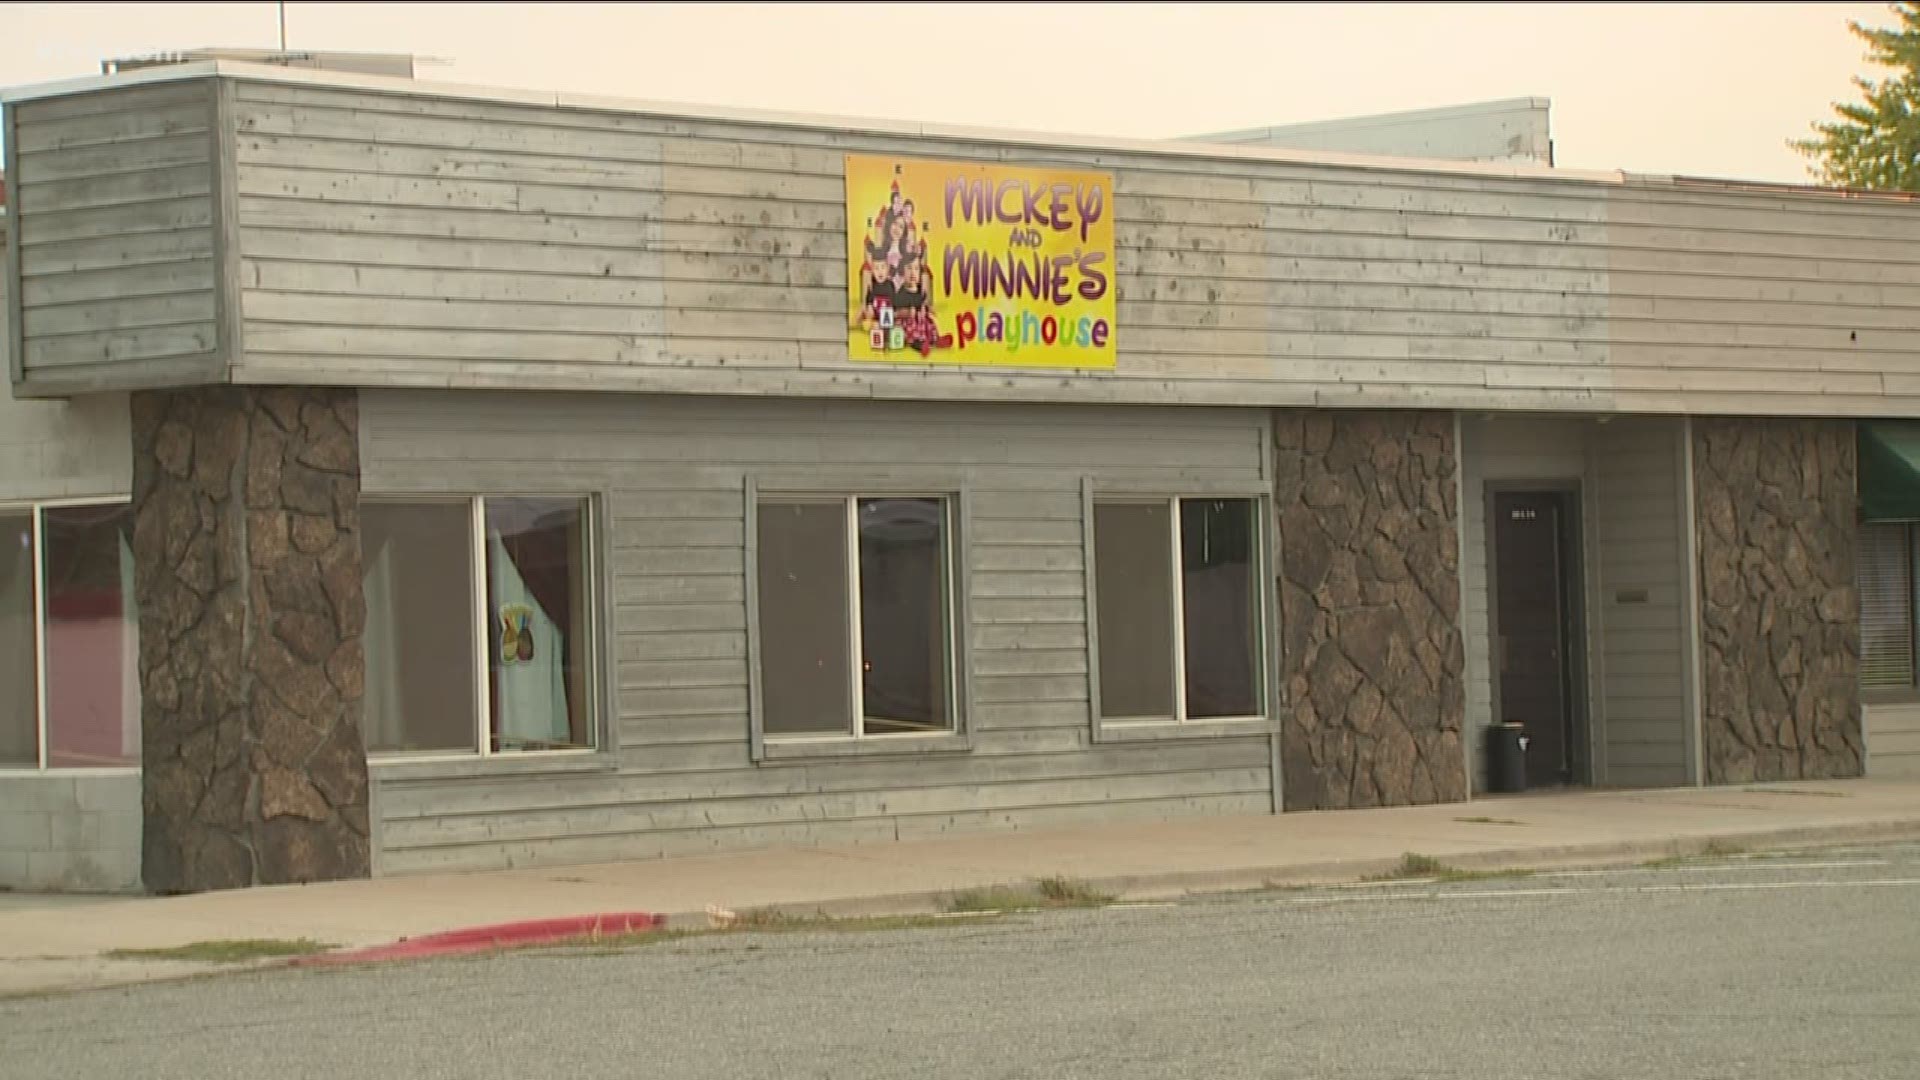 KTVB looked into the regulations surrounding daycare centers in Idaho.